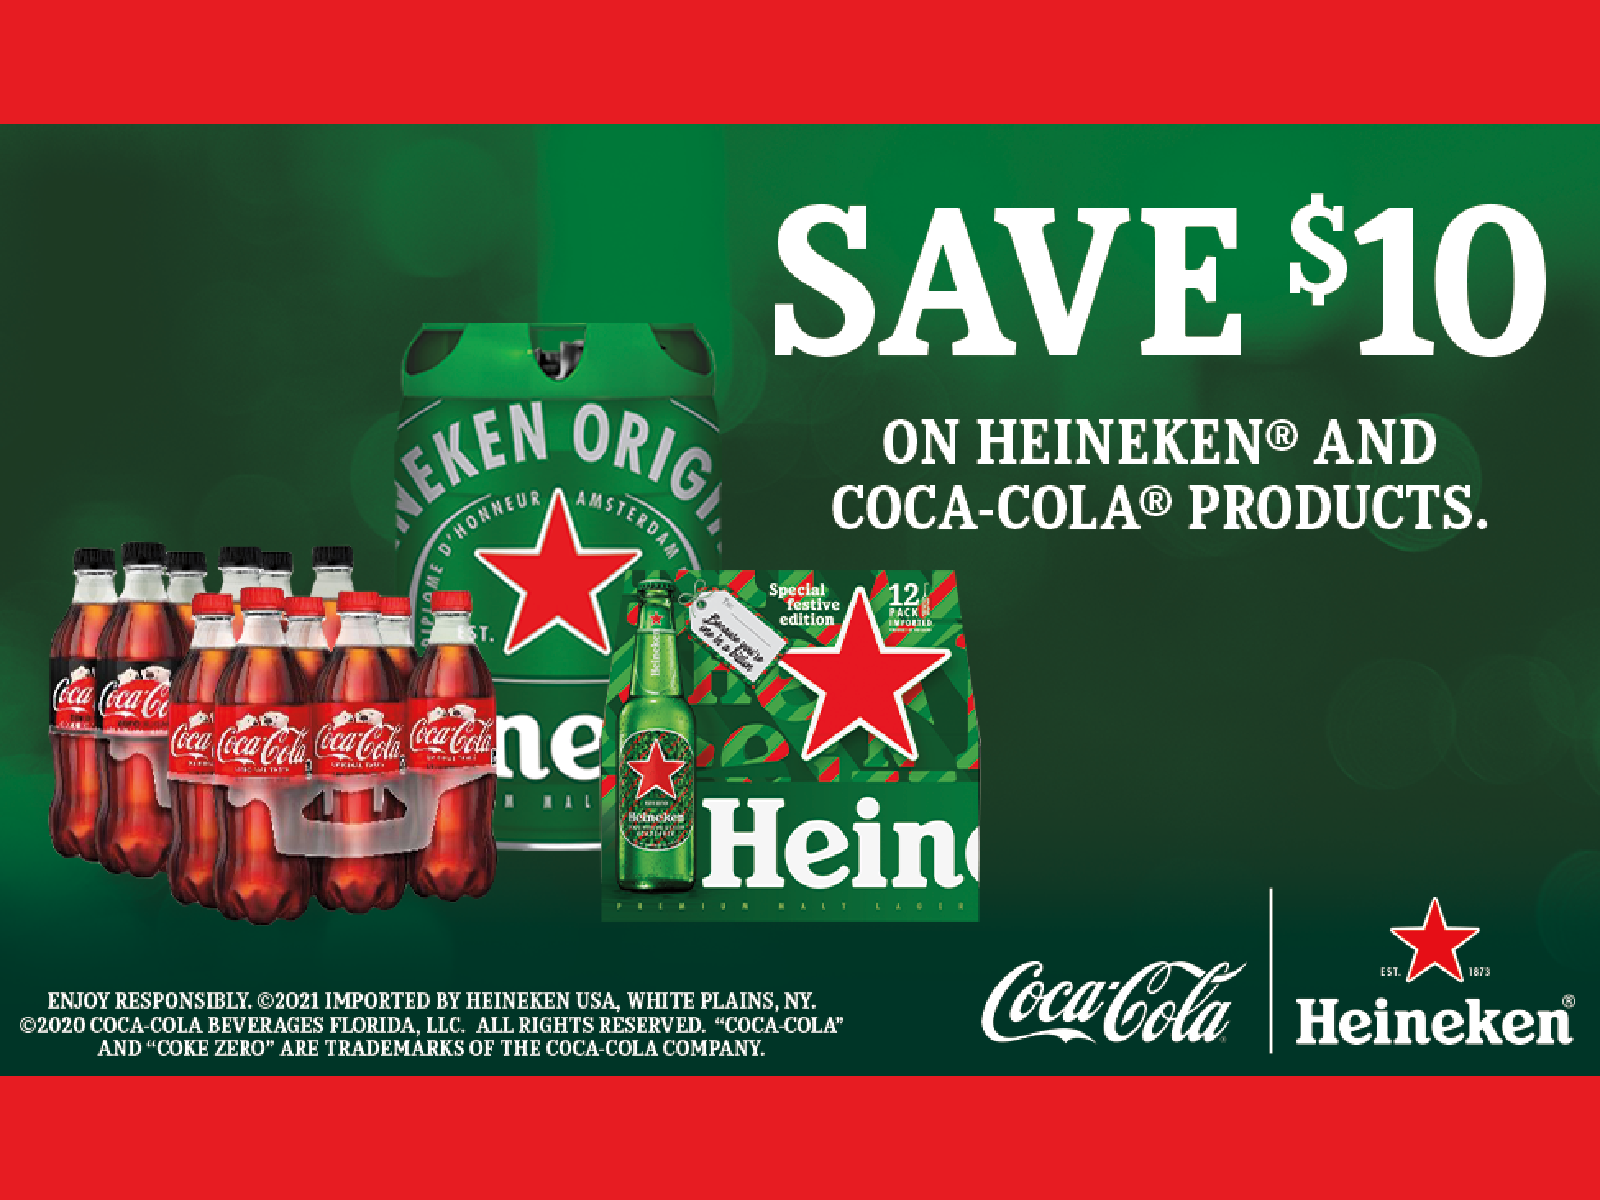 Florida Folks Can Save $10 With A Holiday Beverage Purchase From Heineken & Coca-Cola! on I Heart Publix